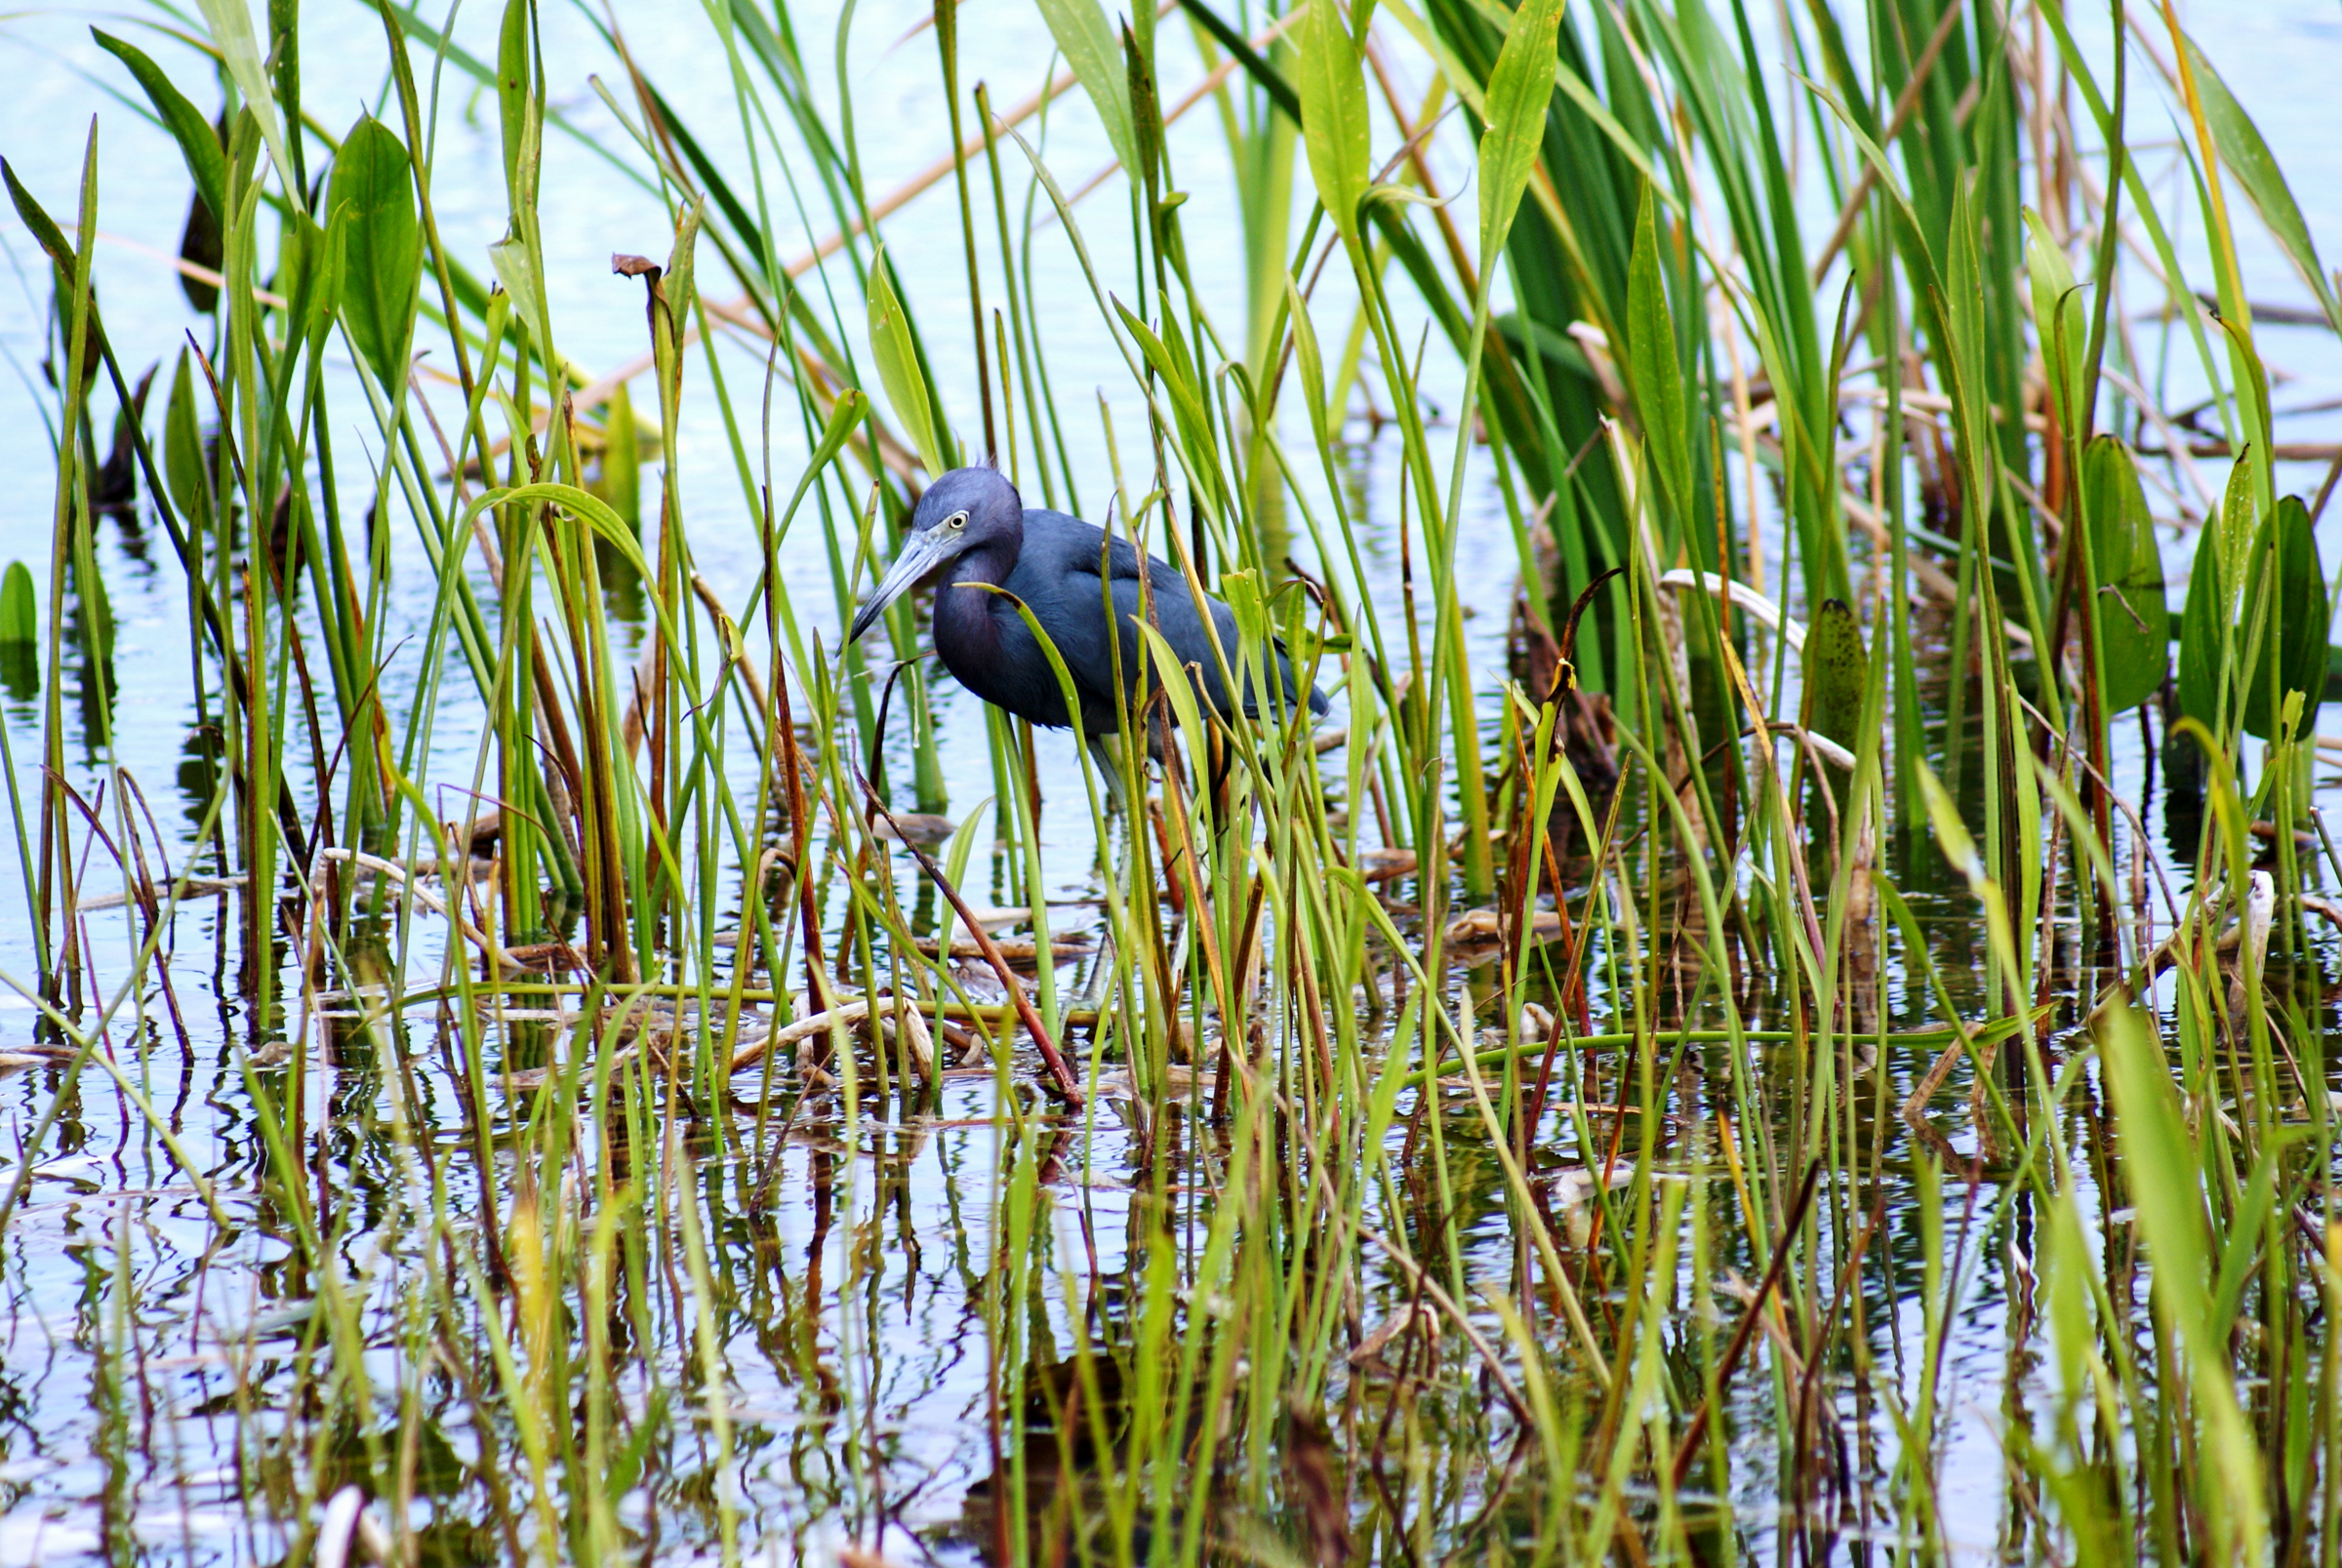 Little Blue Heron stands in a marsh.